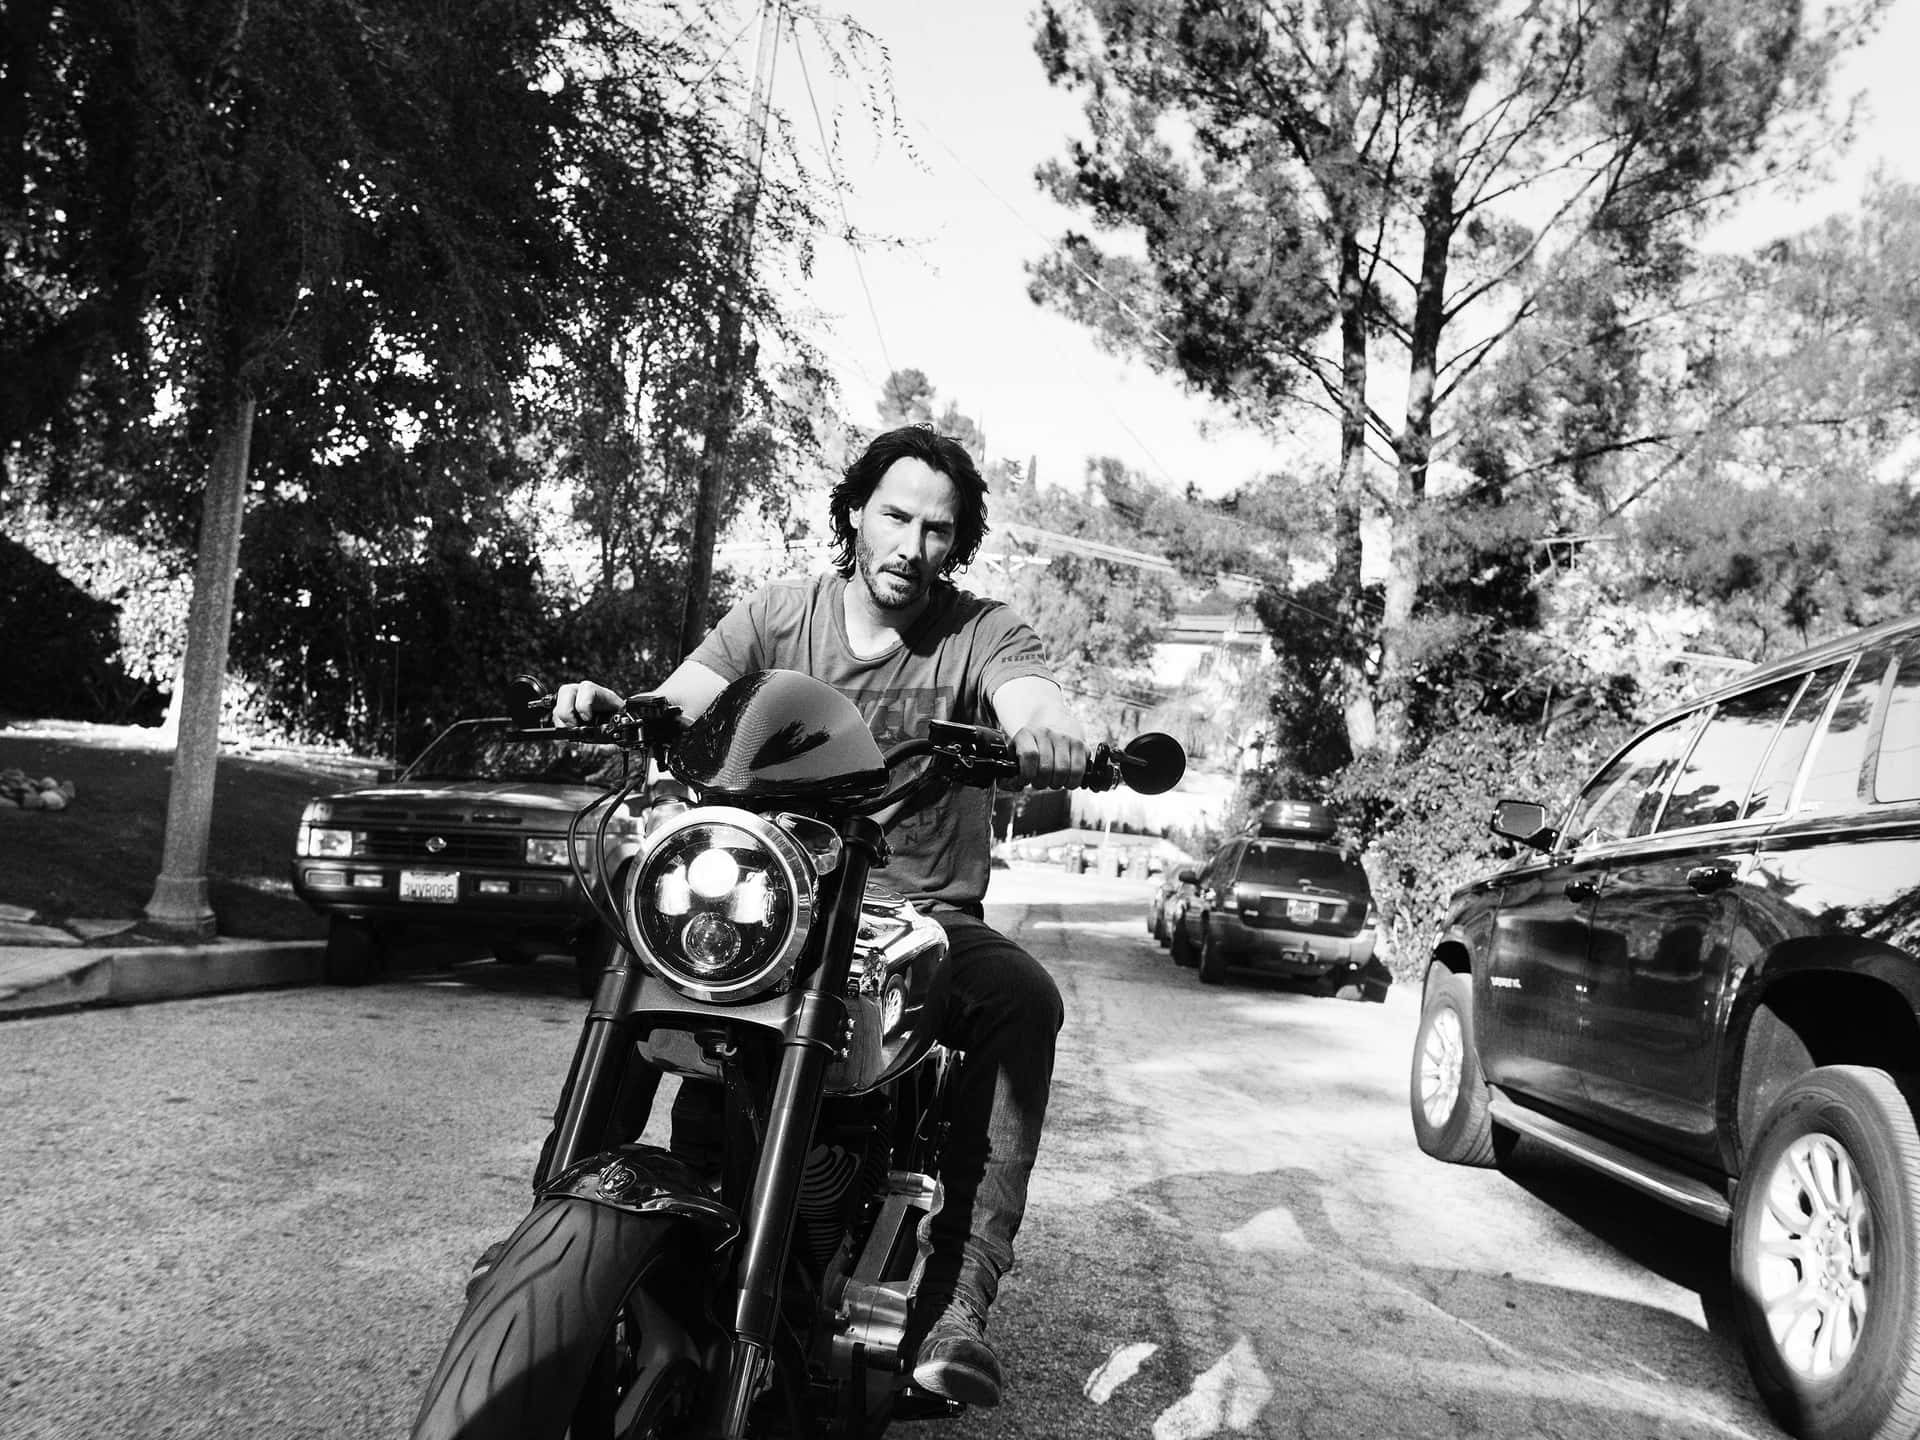 Keanu Reeves striking a pose during a photoshoot